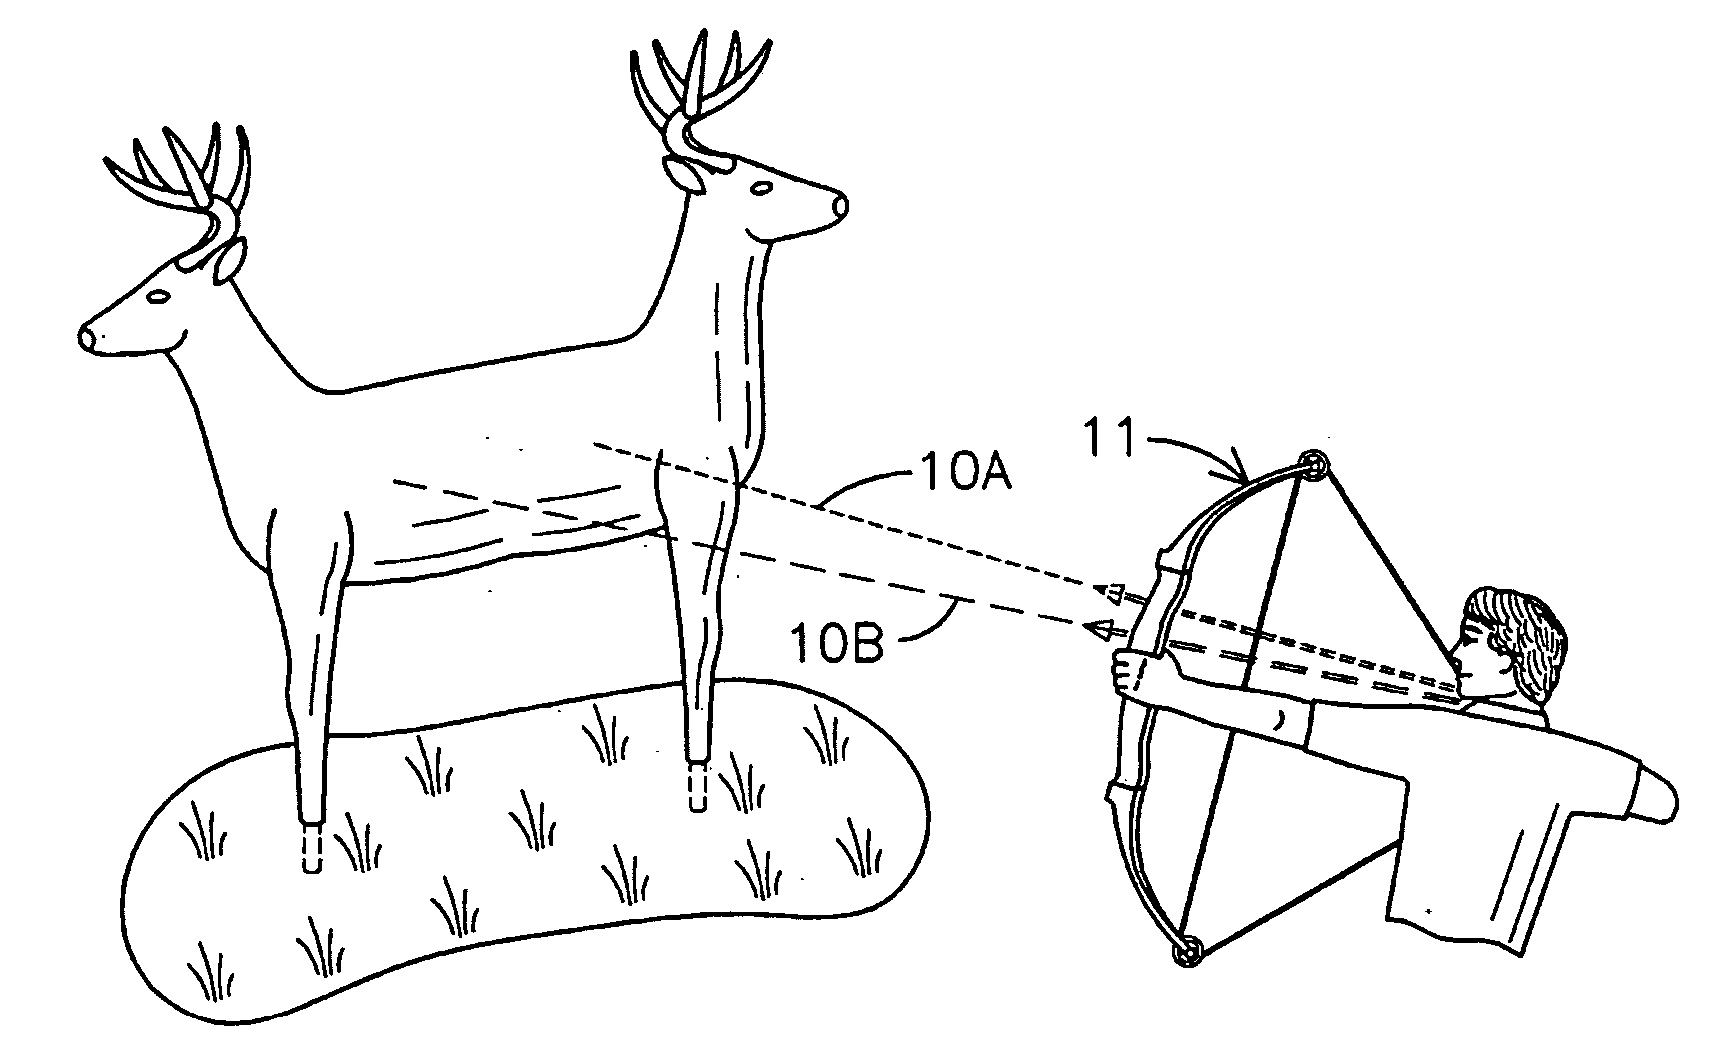 Three-dimensional archery target with multiple vital target areas